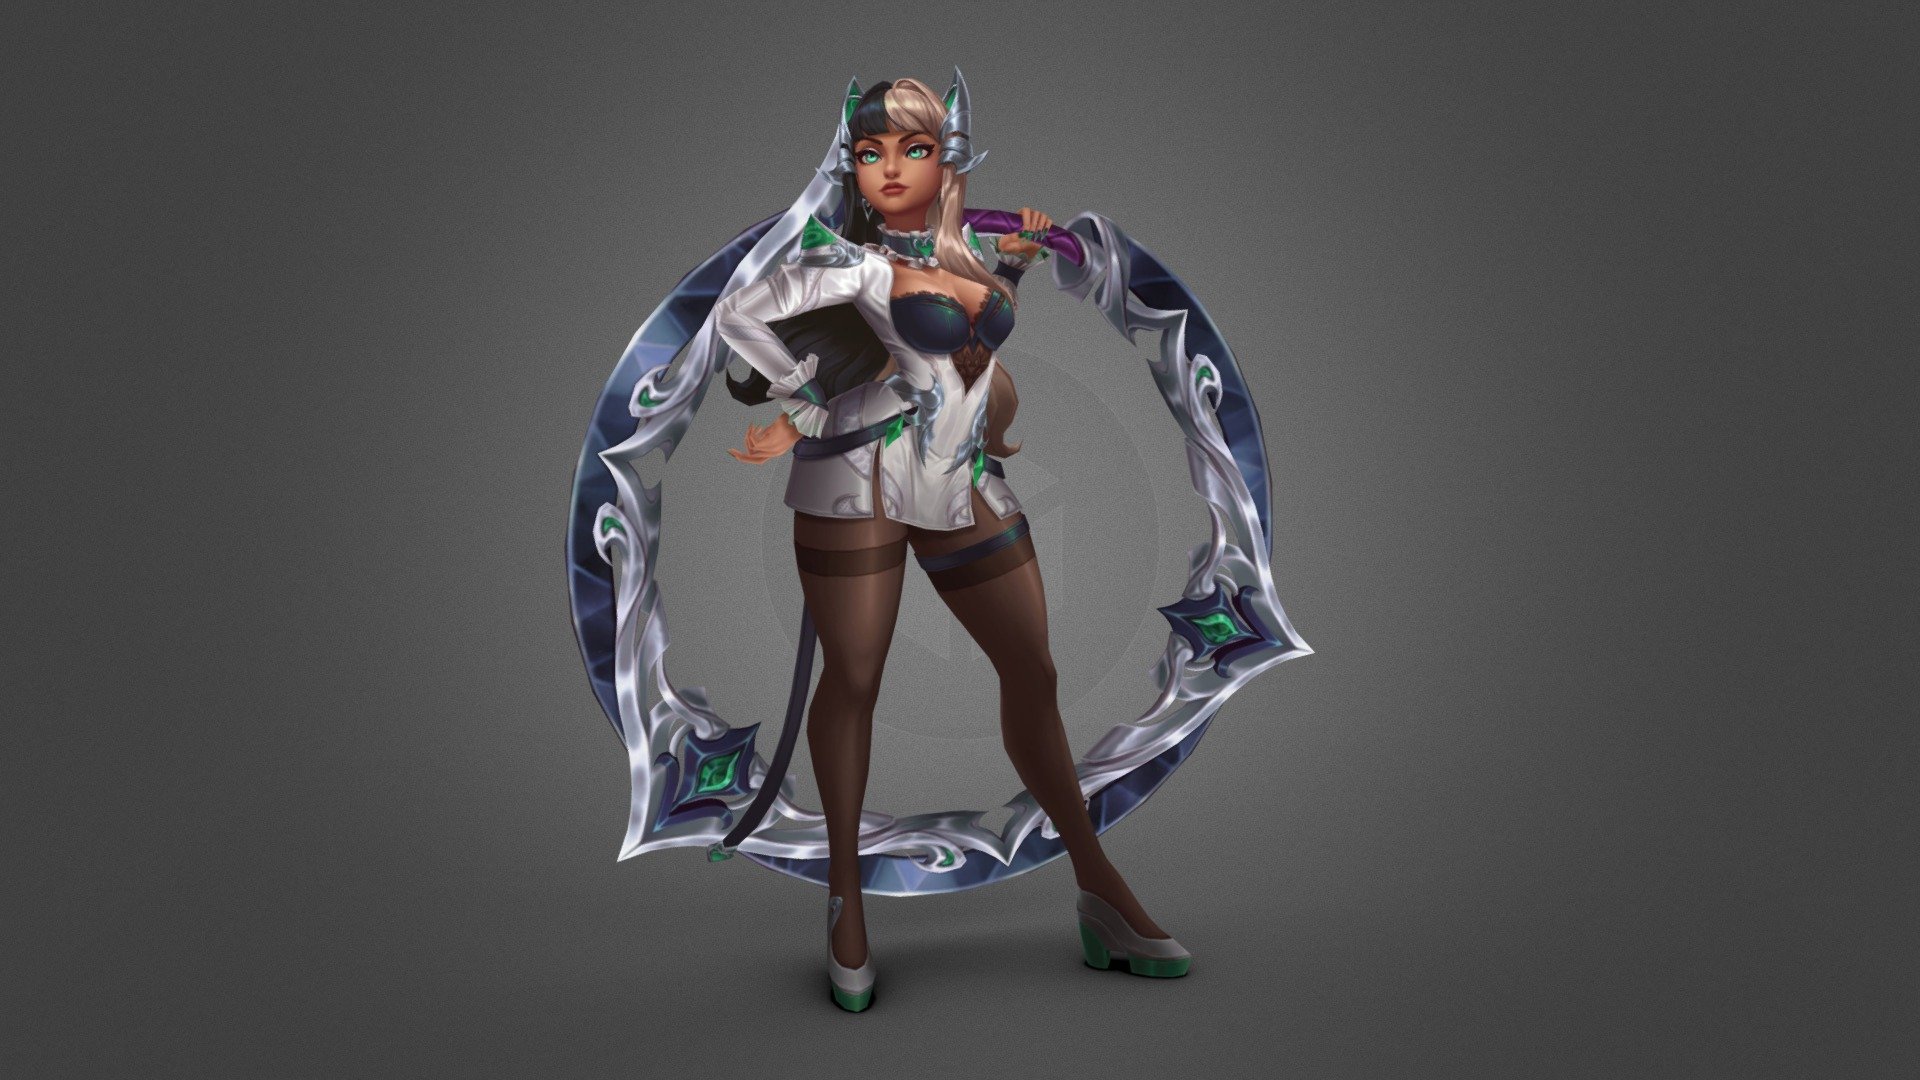 Debonair Qiyana is a fanart skin concepted by jason 小傑. I did sculpting and modeling in Blender, textured in 3D Coat. then rigging and posing back in Blender again. This project is the most difficult project I've done by far due to all the new materials I've encountered for the first time. I learned so much during the past few months, and I am so grateful for those who helped me along the way. Big shoutout to the Handpainter's Guild as well as the concept artist himself to troubleshoot some of the designs that aren't shown in the original concept. I hope everyone enjoys this and I will as always keep on improving! Thank you~~

Amazing concept by jason 小傑: https://www.artstation.com/artwork/xYqY9r - Debonair Qiyana Model - 3D model by lucqiiiii 3d model